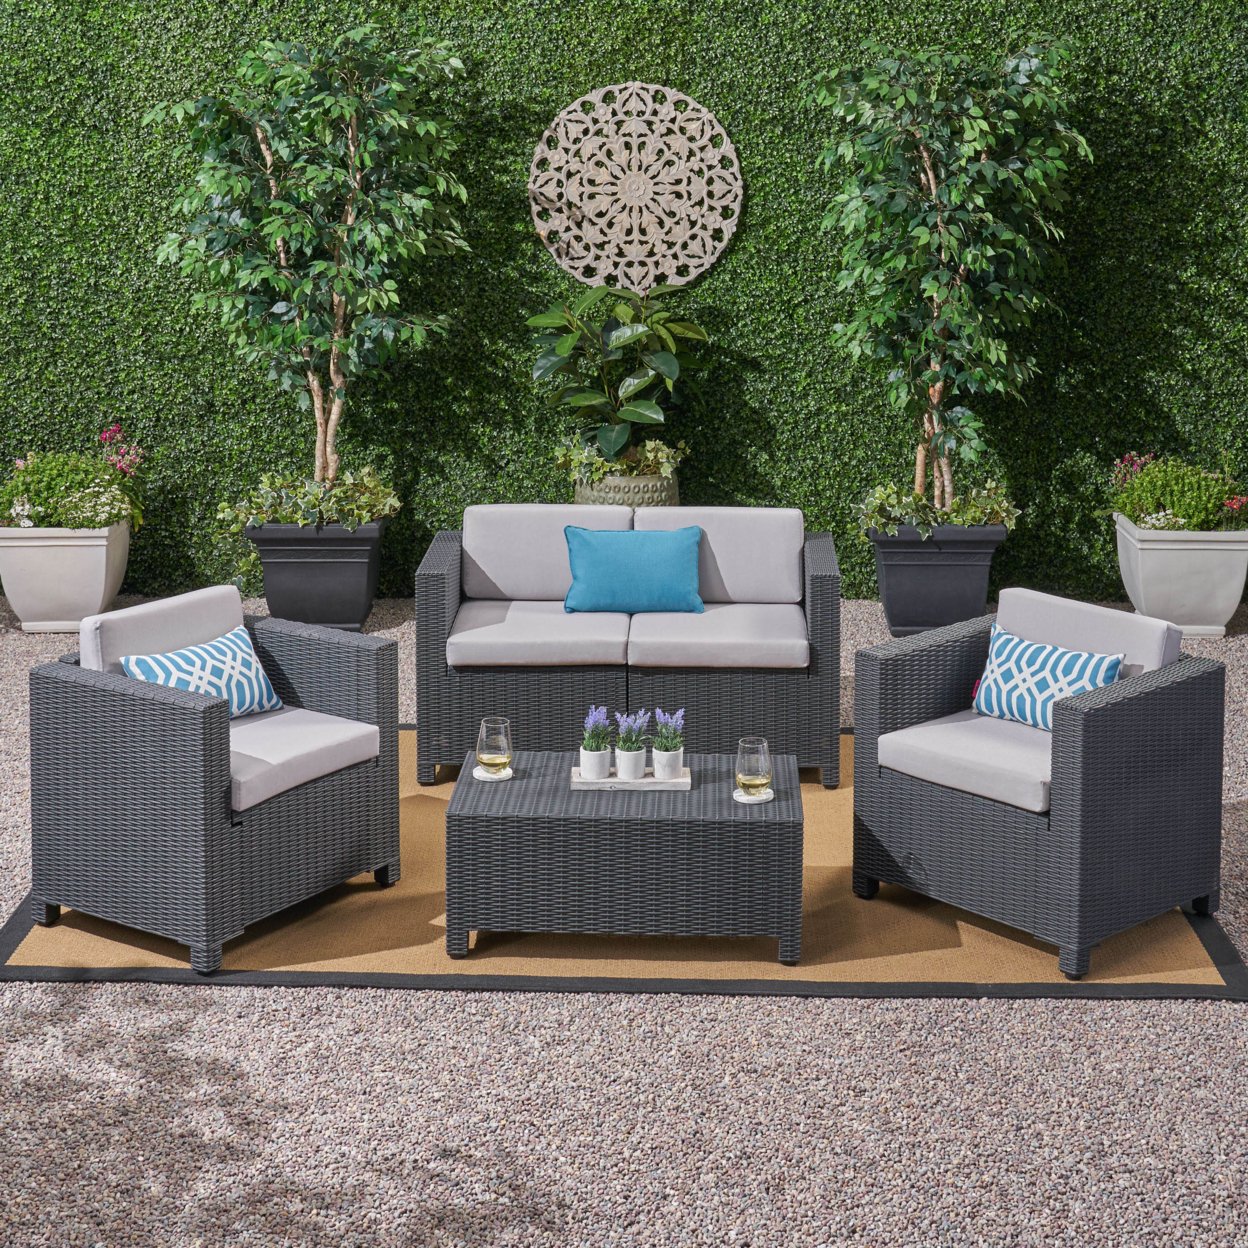 Riley Outdoor All Weather Faux Wicker 4 Seater Chat Set With Cushions - Dark Gray + Gray